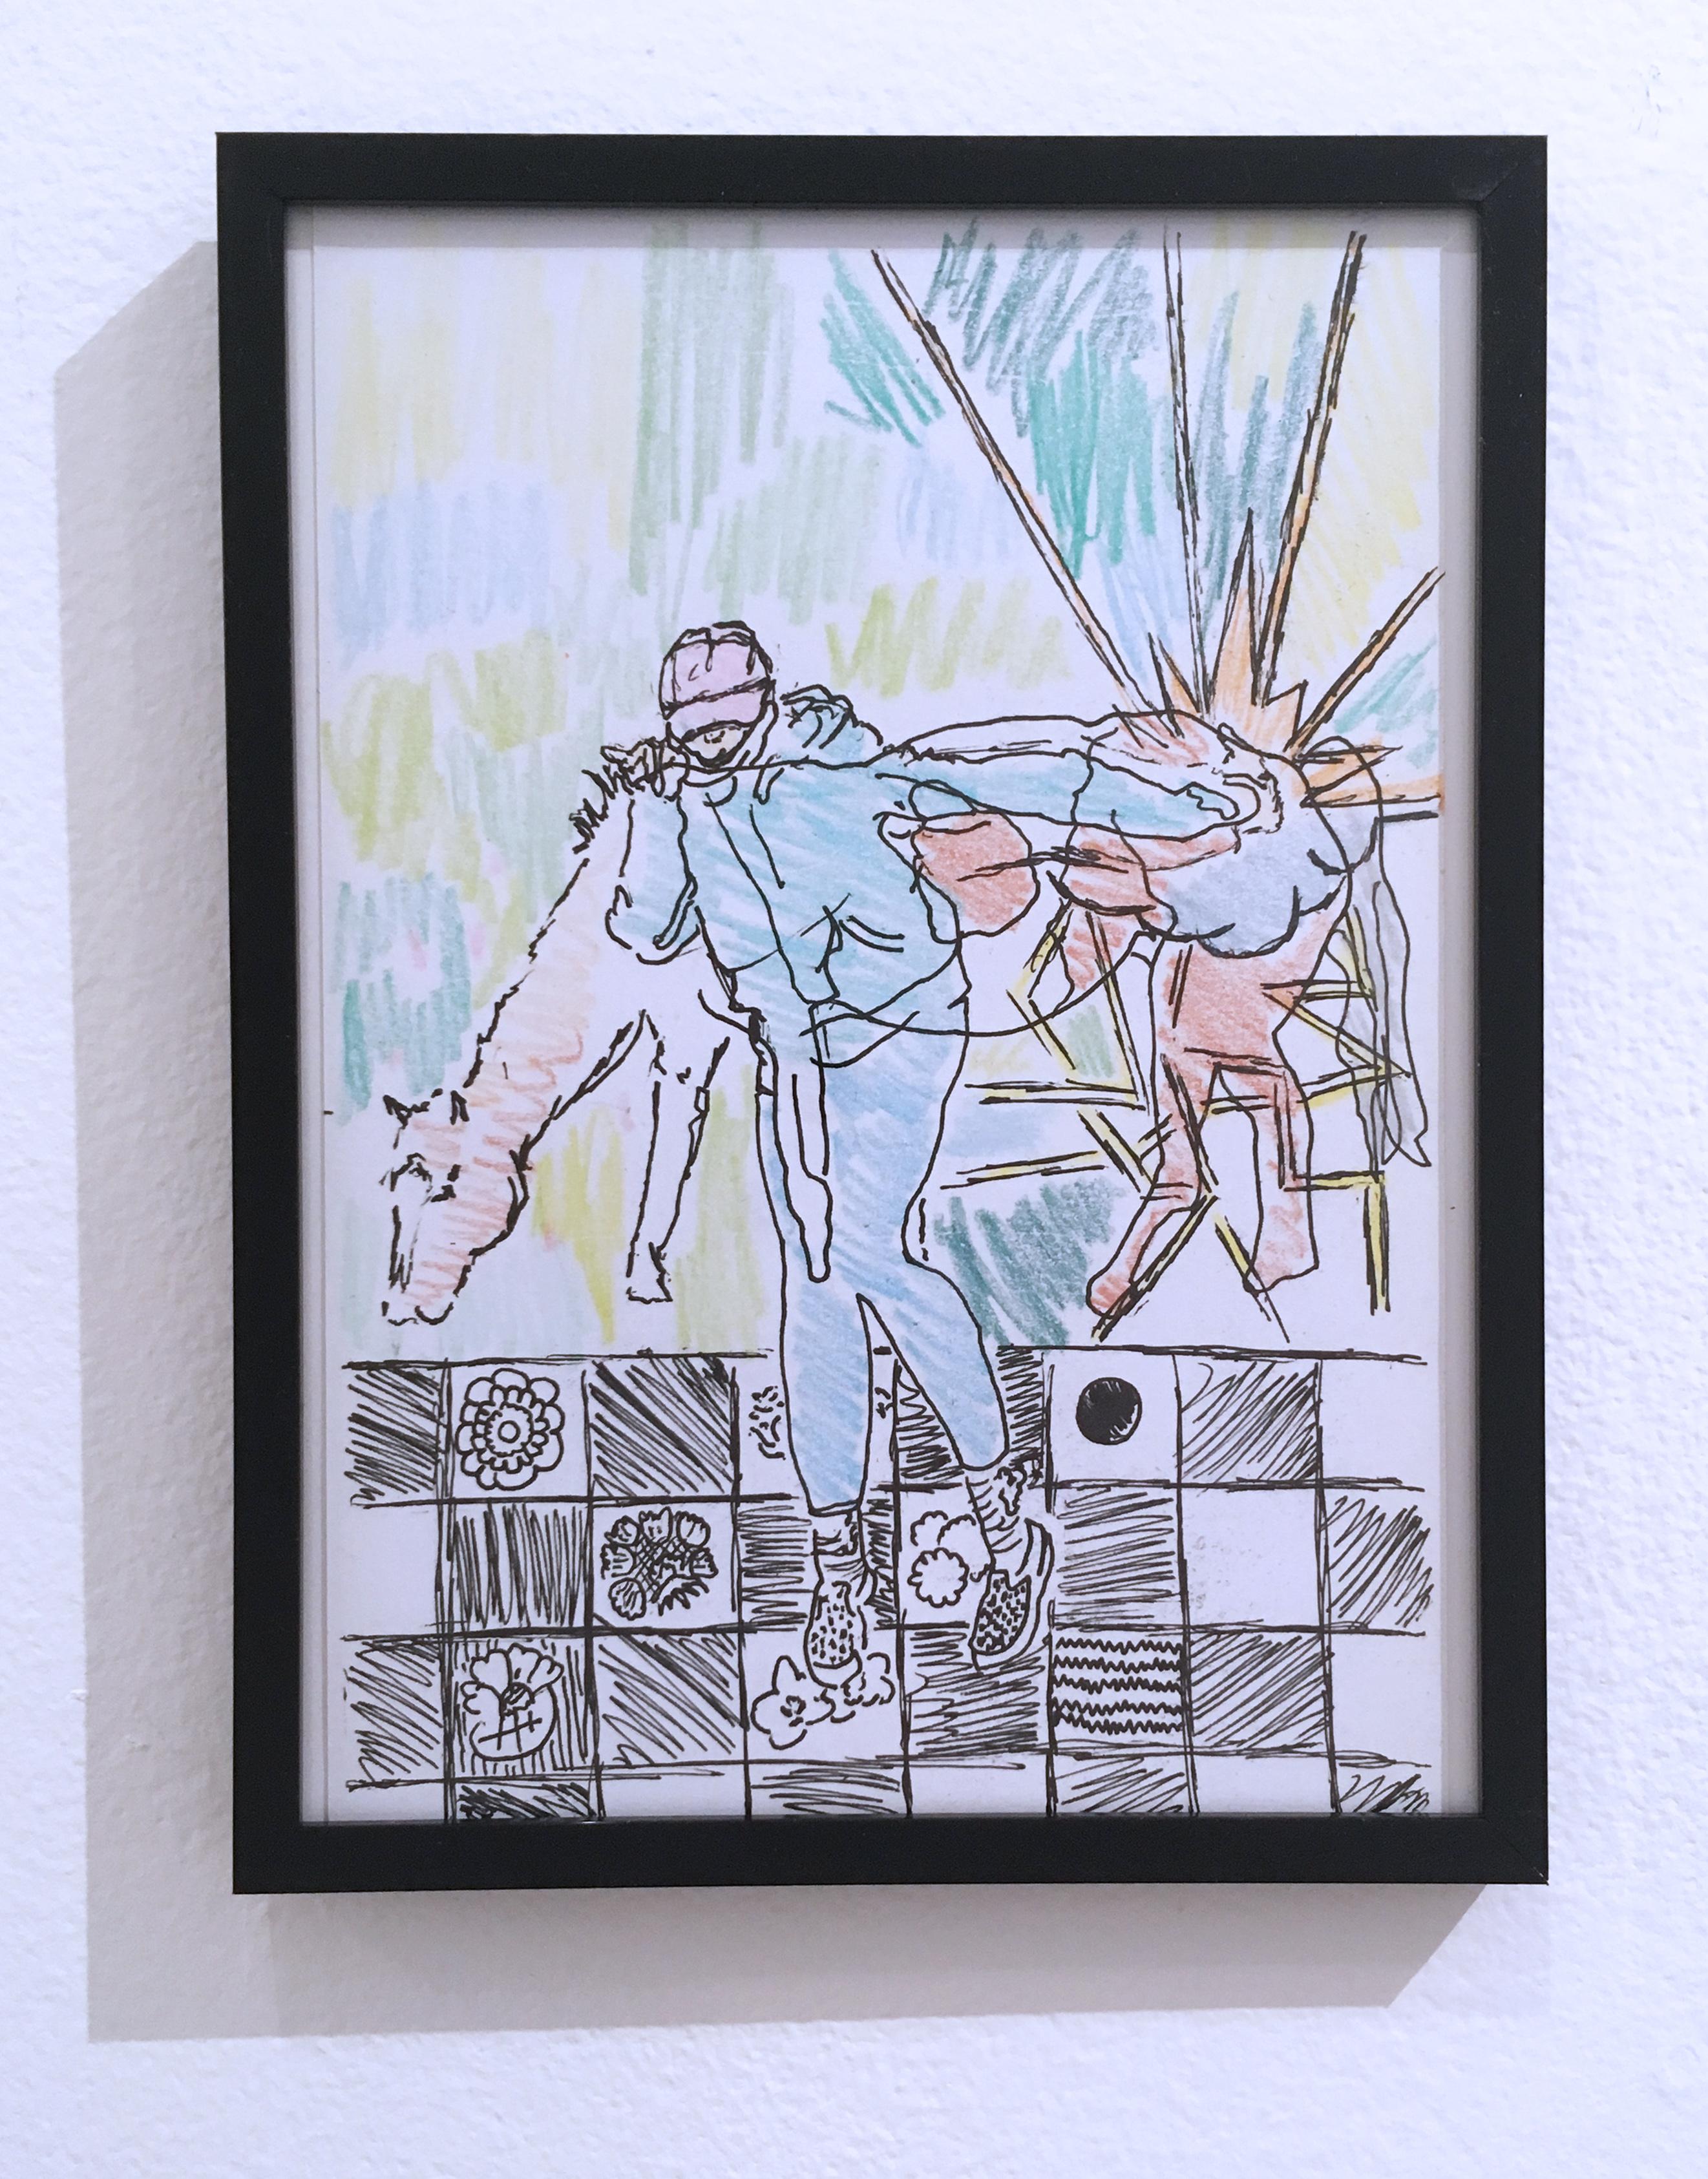 Macauley Norman Figurative Painting - A Girl and a Horse, 2018, pen and crayon on paper, figurative, drawing, framed